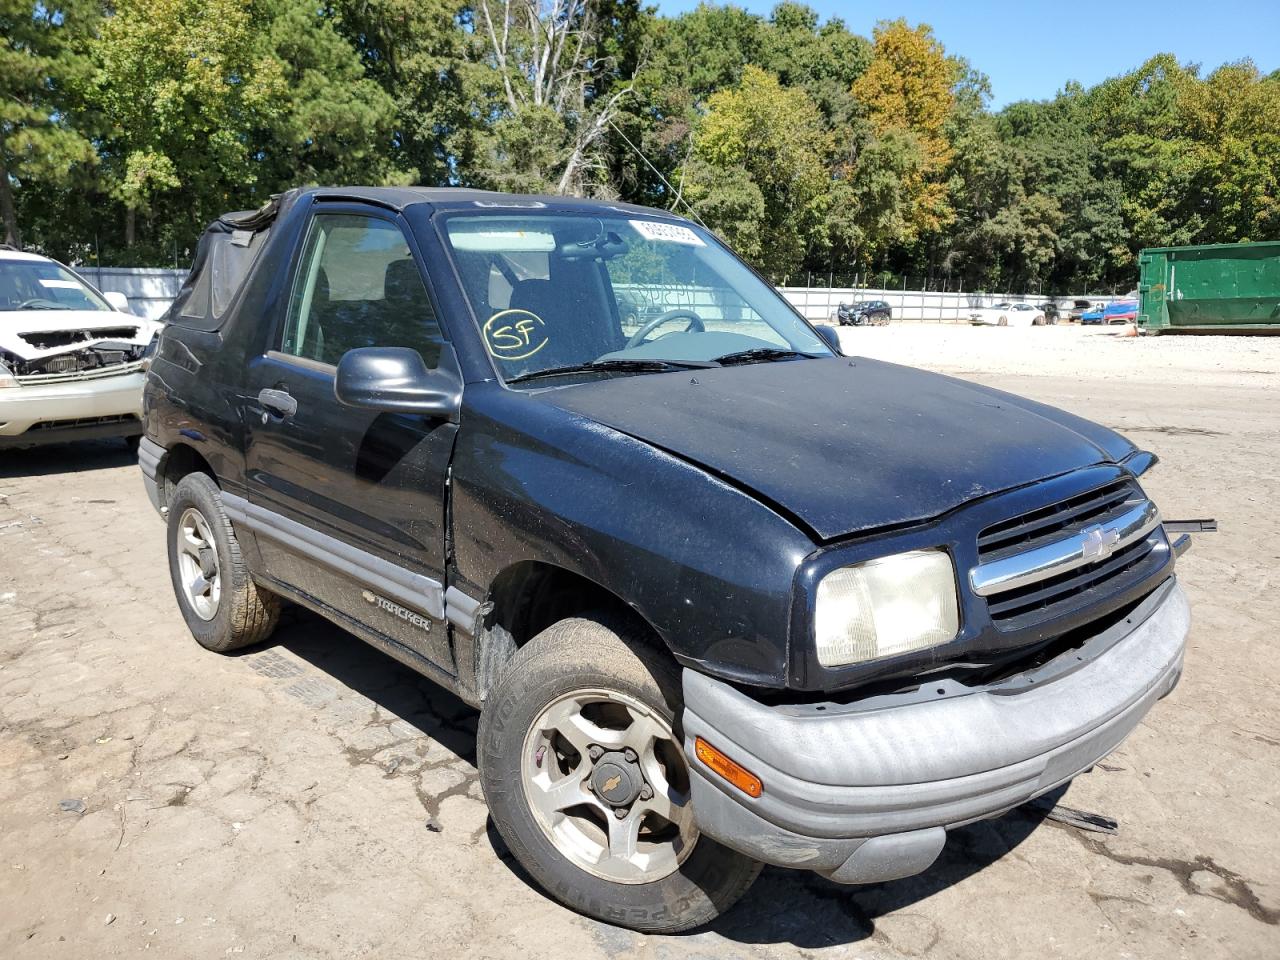 2001 Chevrolet Tracker for sale at Copart Austell, GA. Lot #60657*** |  SalvageAutosAuction.com